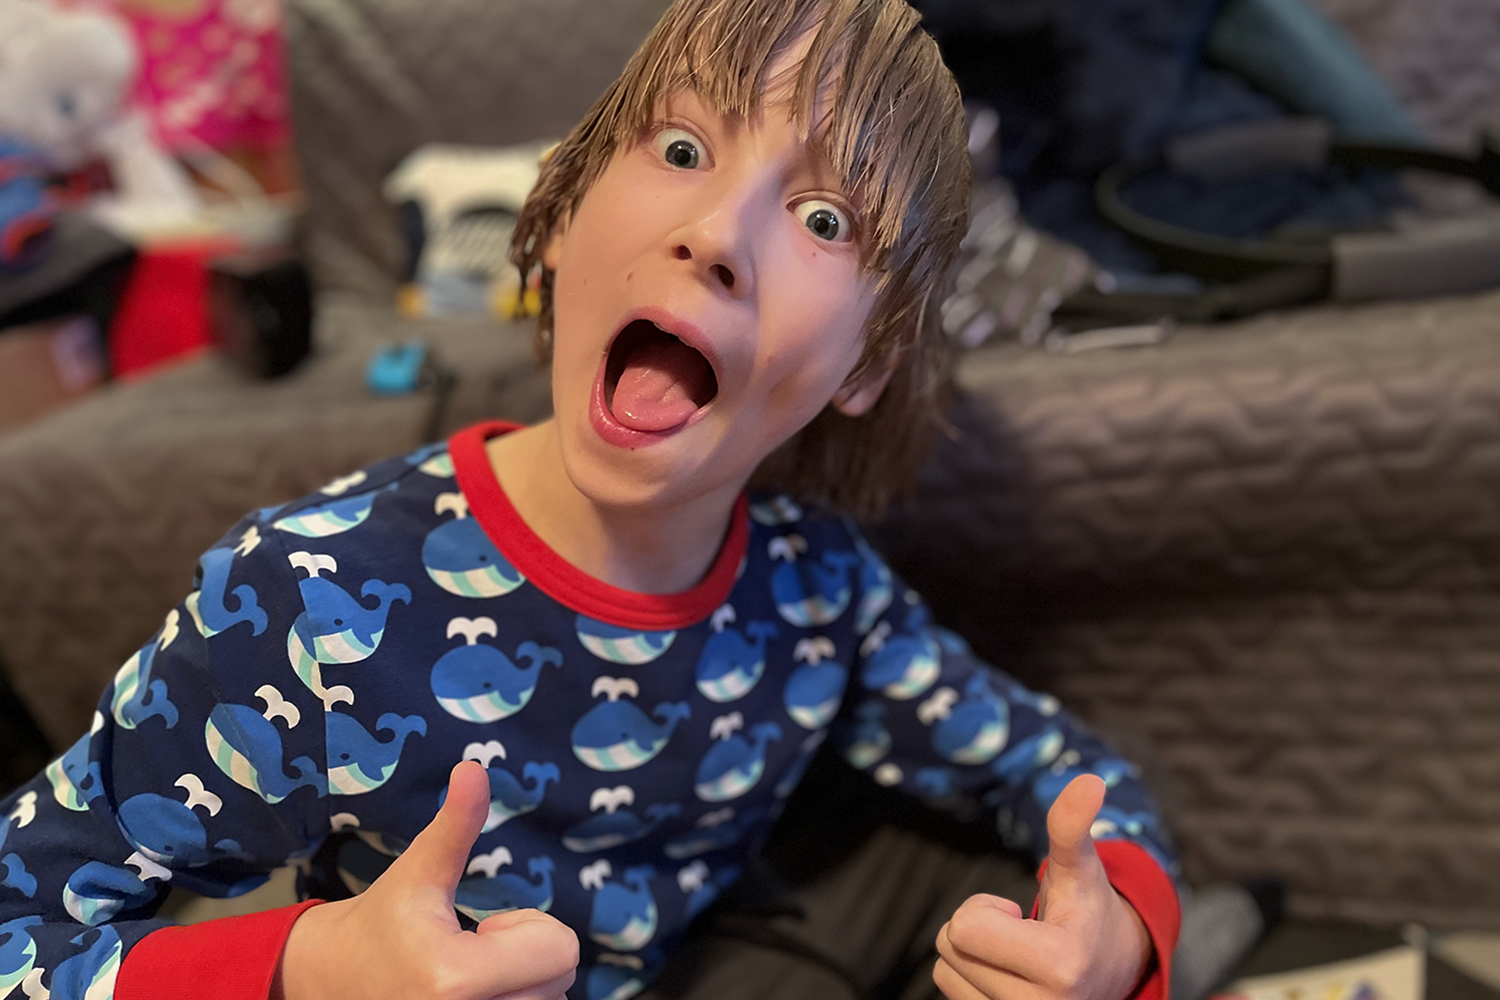 Toby with wet hair, both thumbs up and pulling a silly face